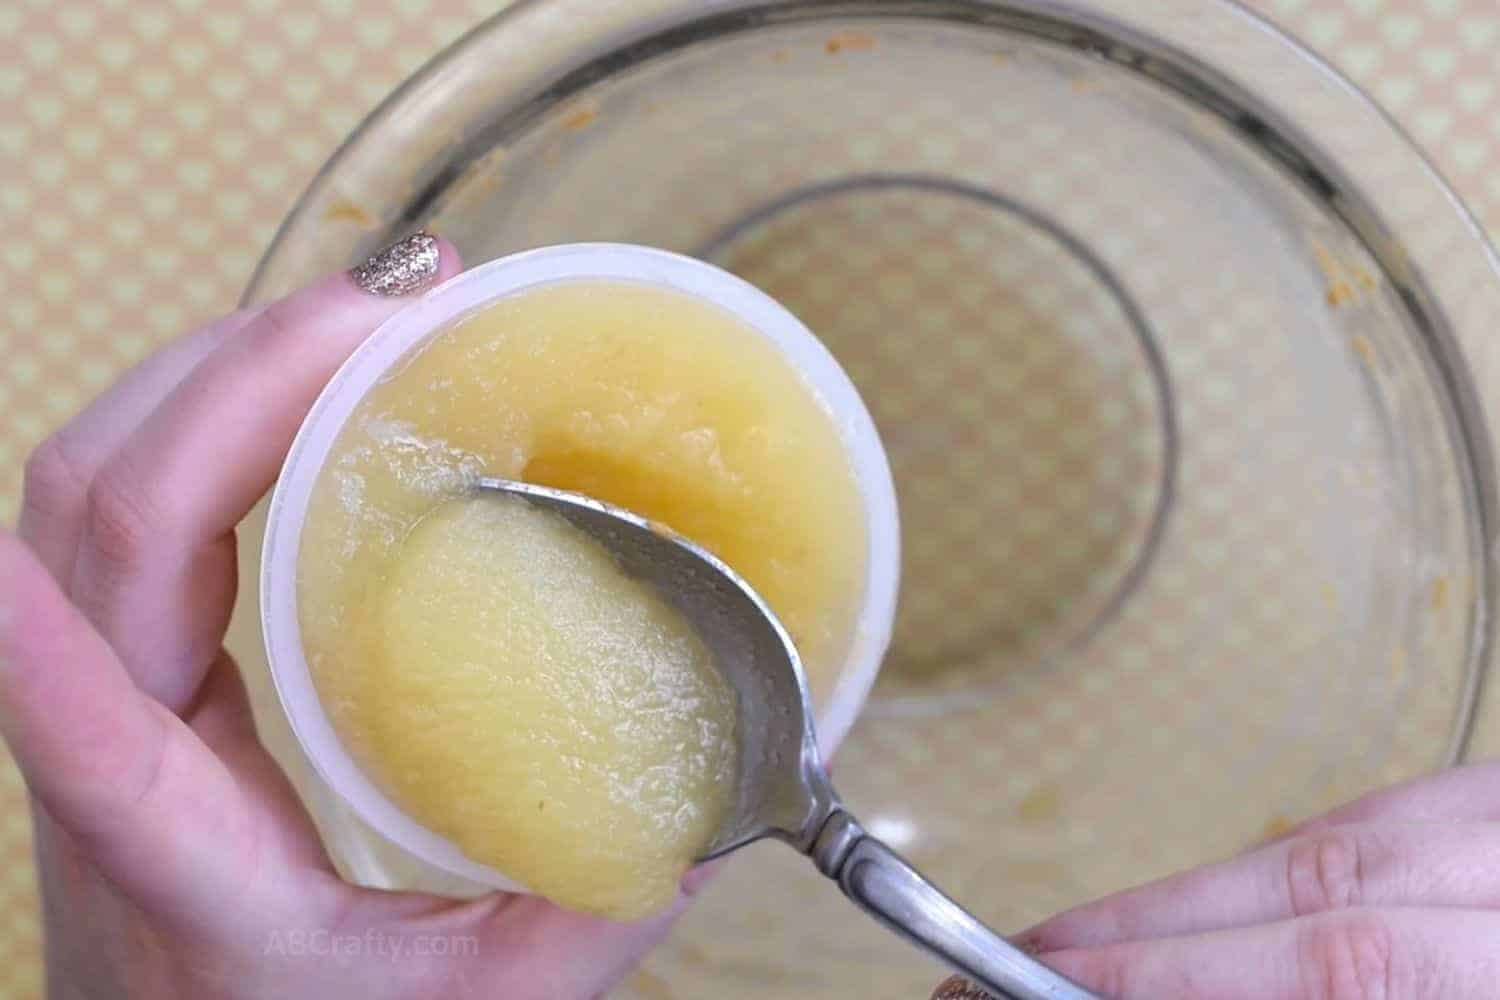 Scooping applesauce from a single serve applesauce container with a spoon over a bowl